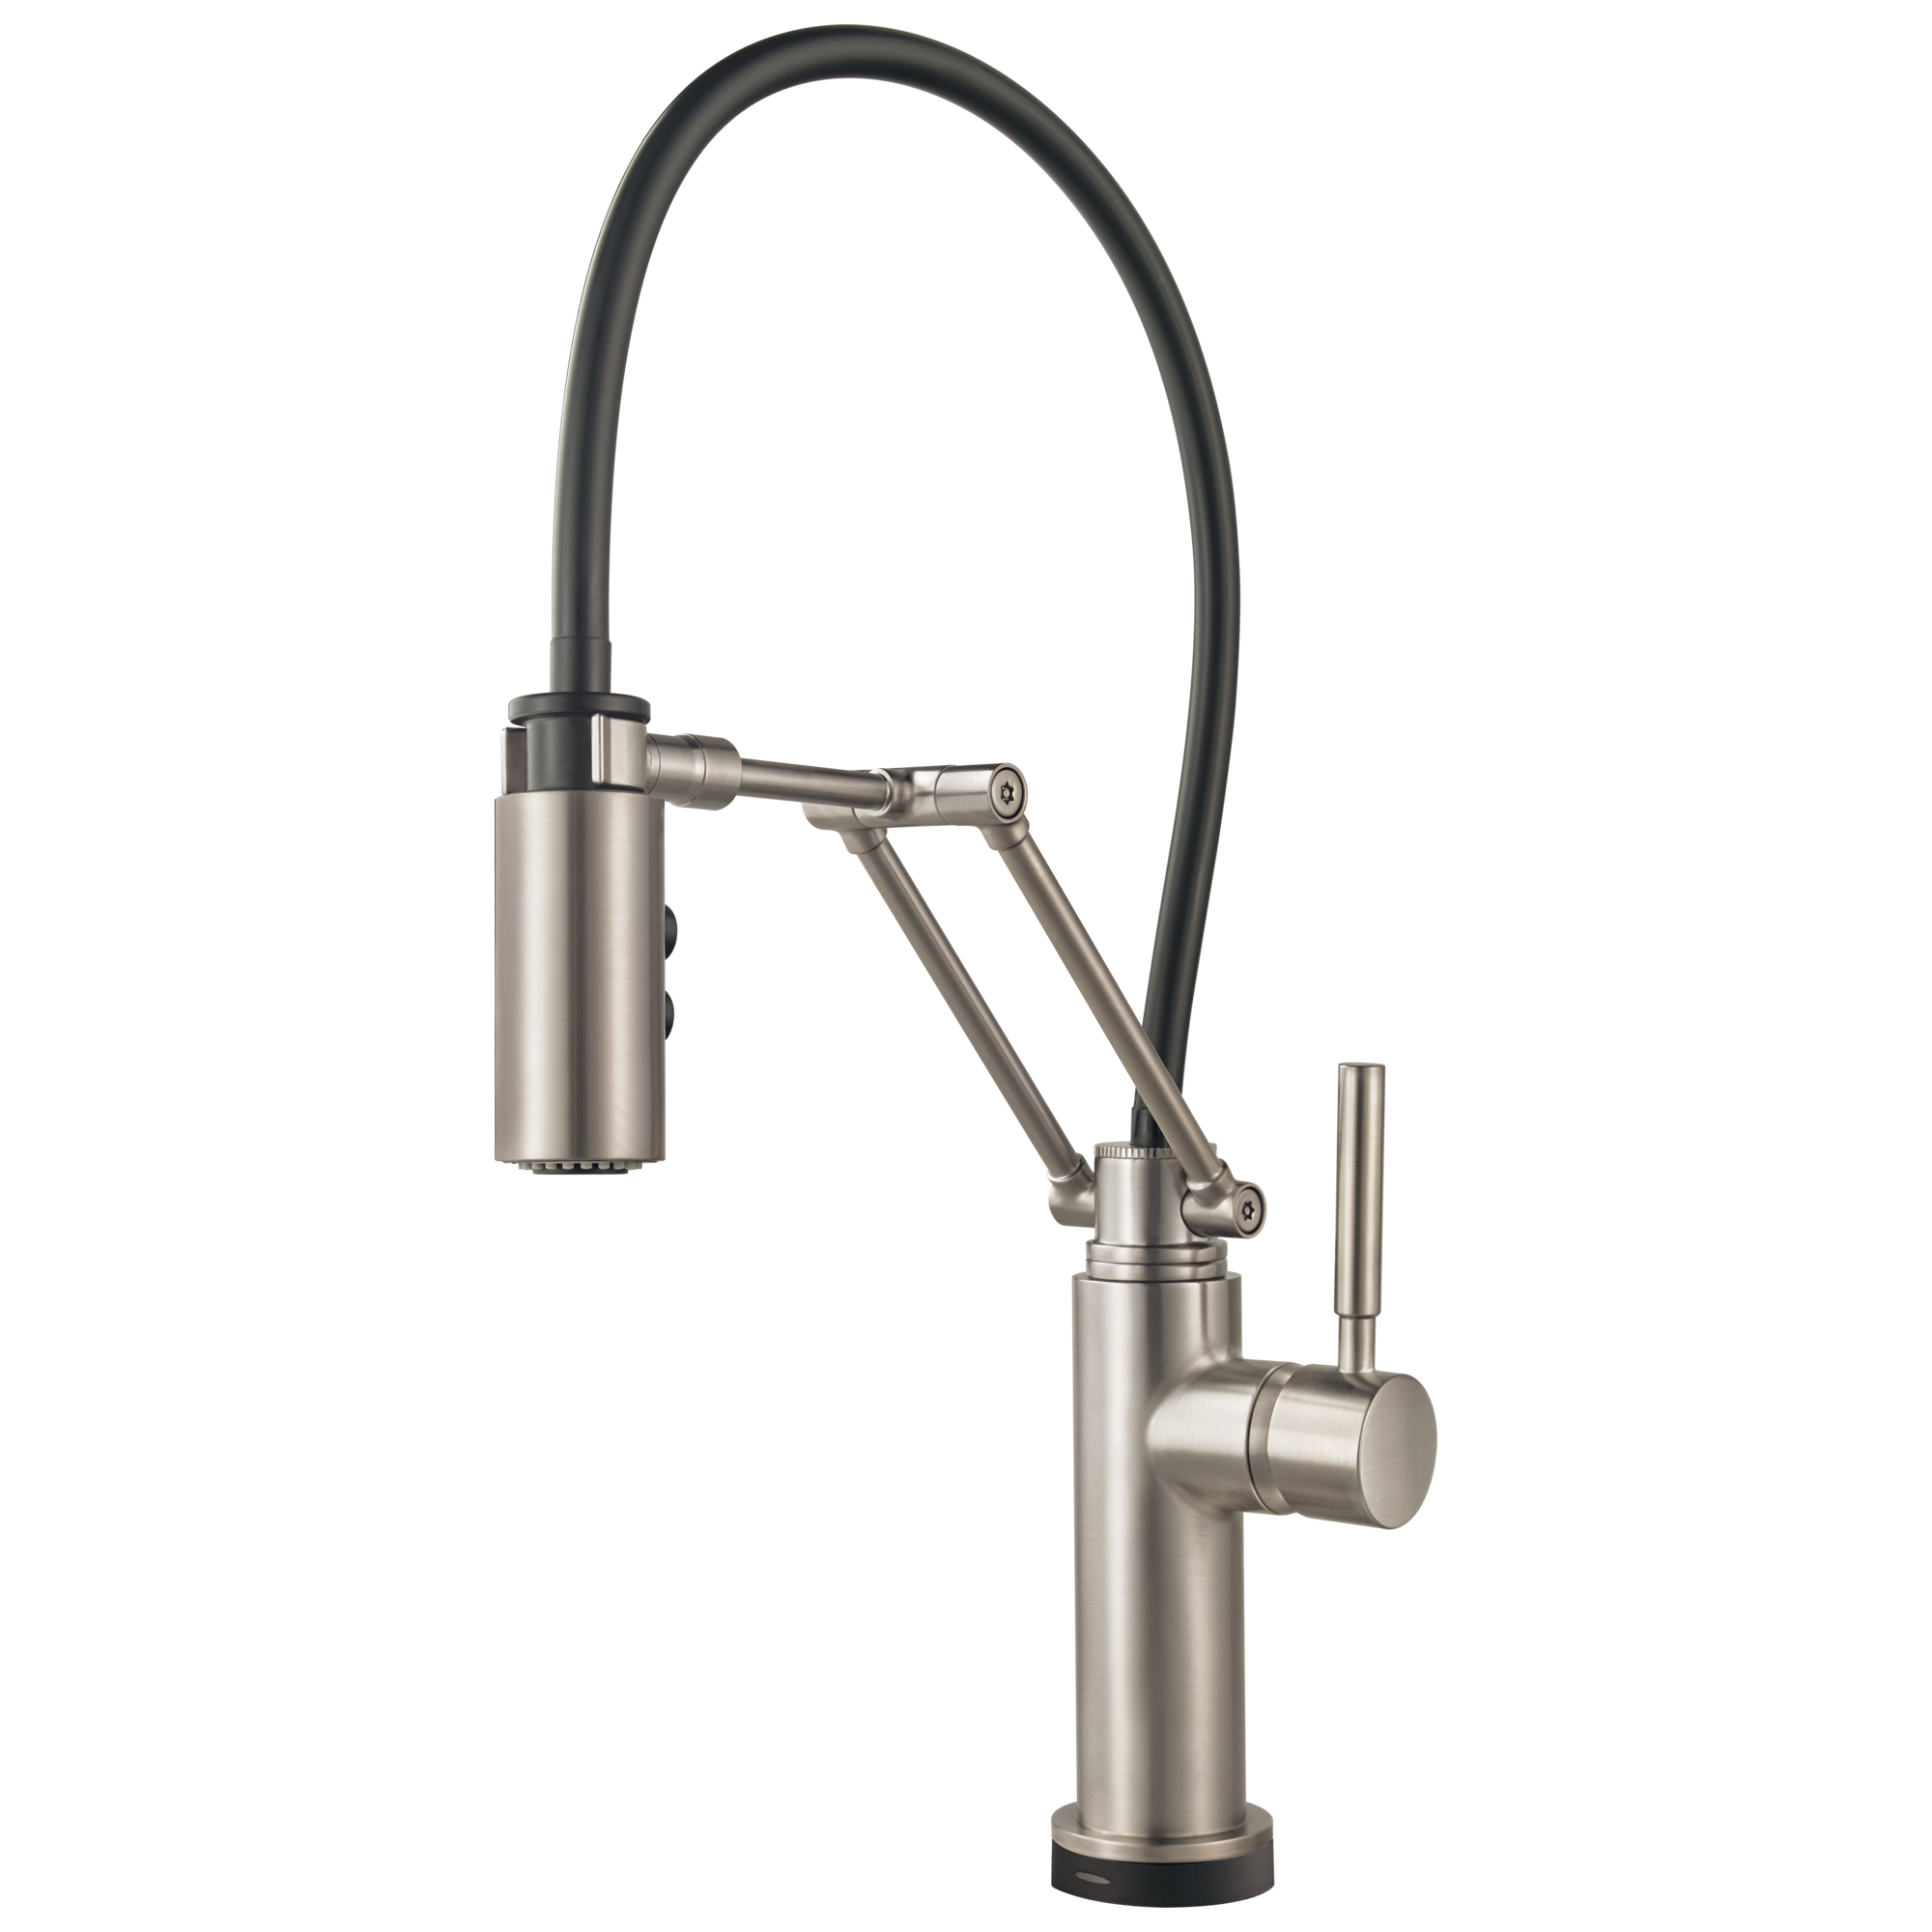 Brizo Solna Single Handle Articulating Kitchen Kitchen Faucet with Smart Touch Technology